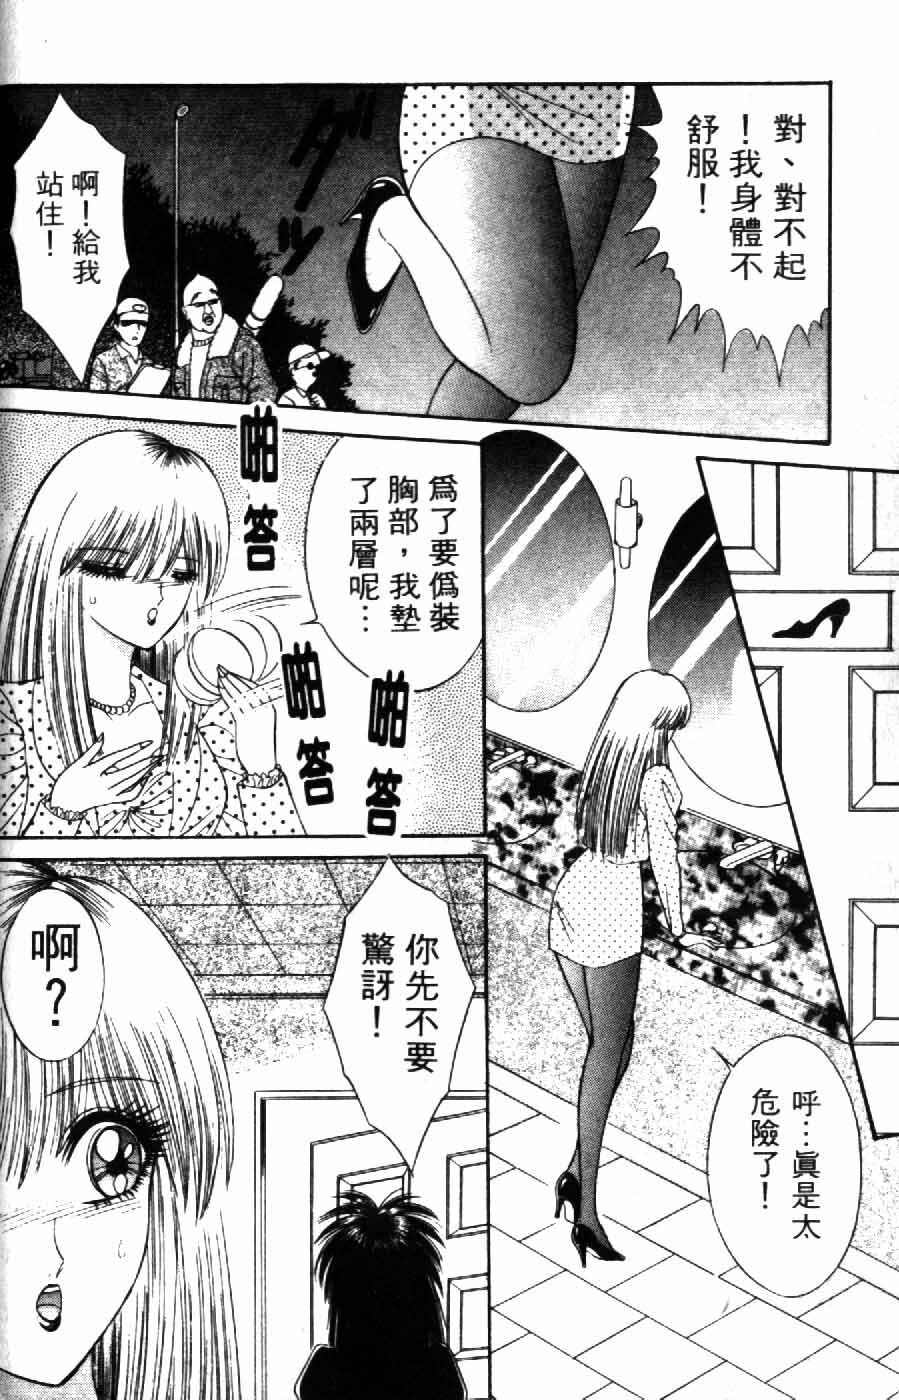 [Senno Knife] Ouma ga Horror Show 2 - Trans Sexual Special Show 2 | 顫慄博覽會 2 [Chinese] page 50 full